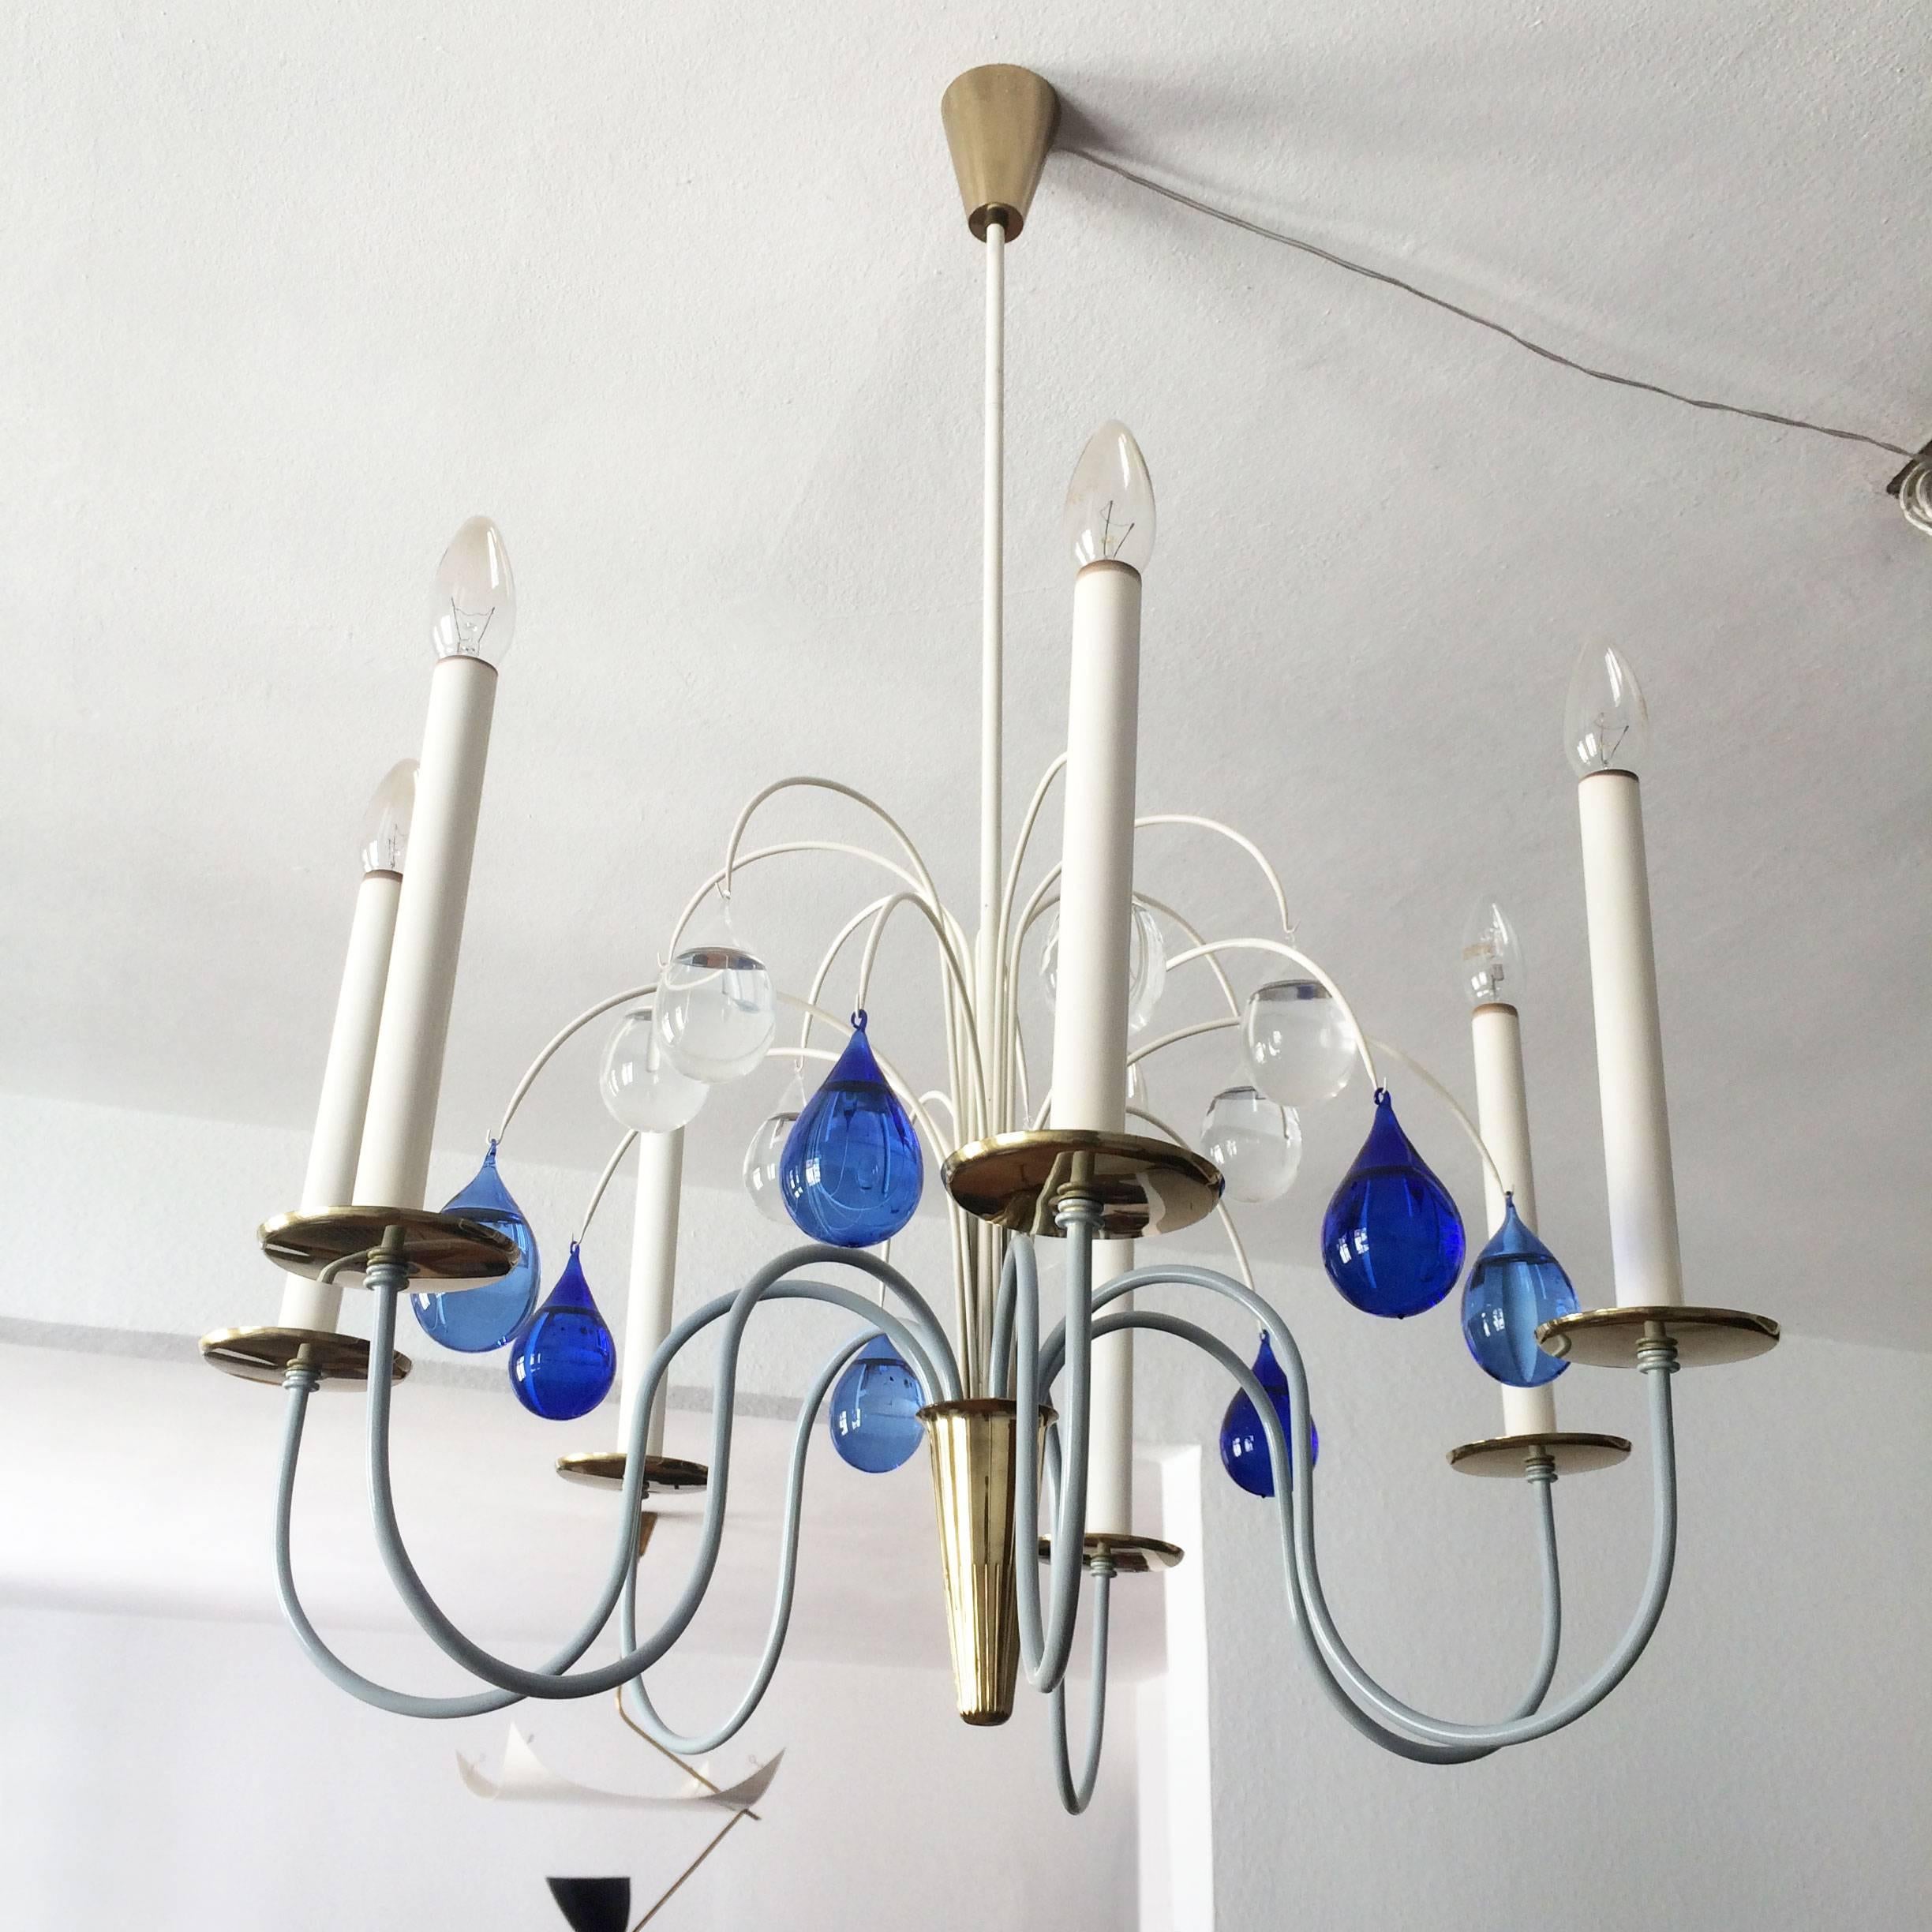 Lacquered Seven-Armed Chandelier or Pendant Lamp by Vereinigte Werkstätten Germany 1950s For Sale